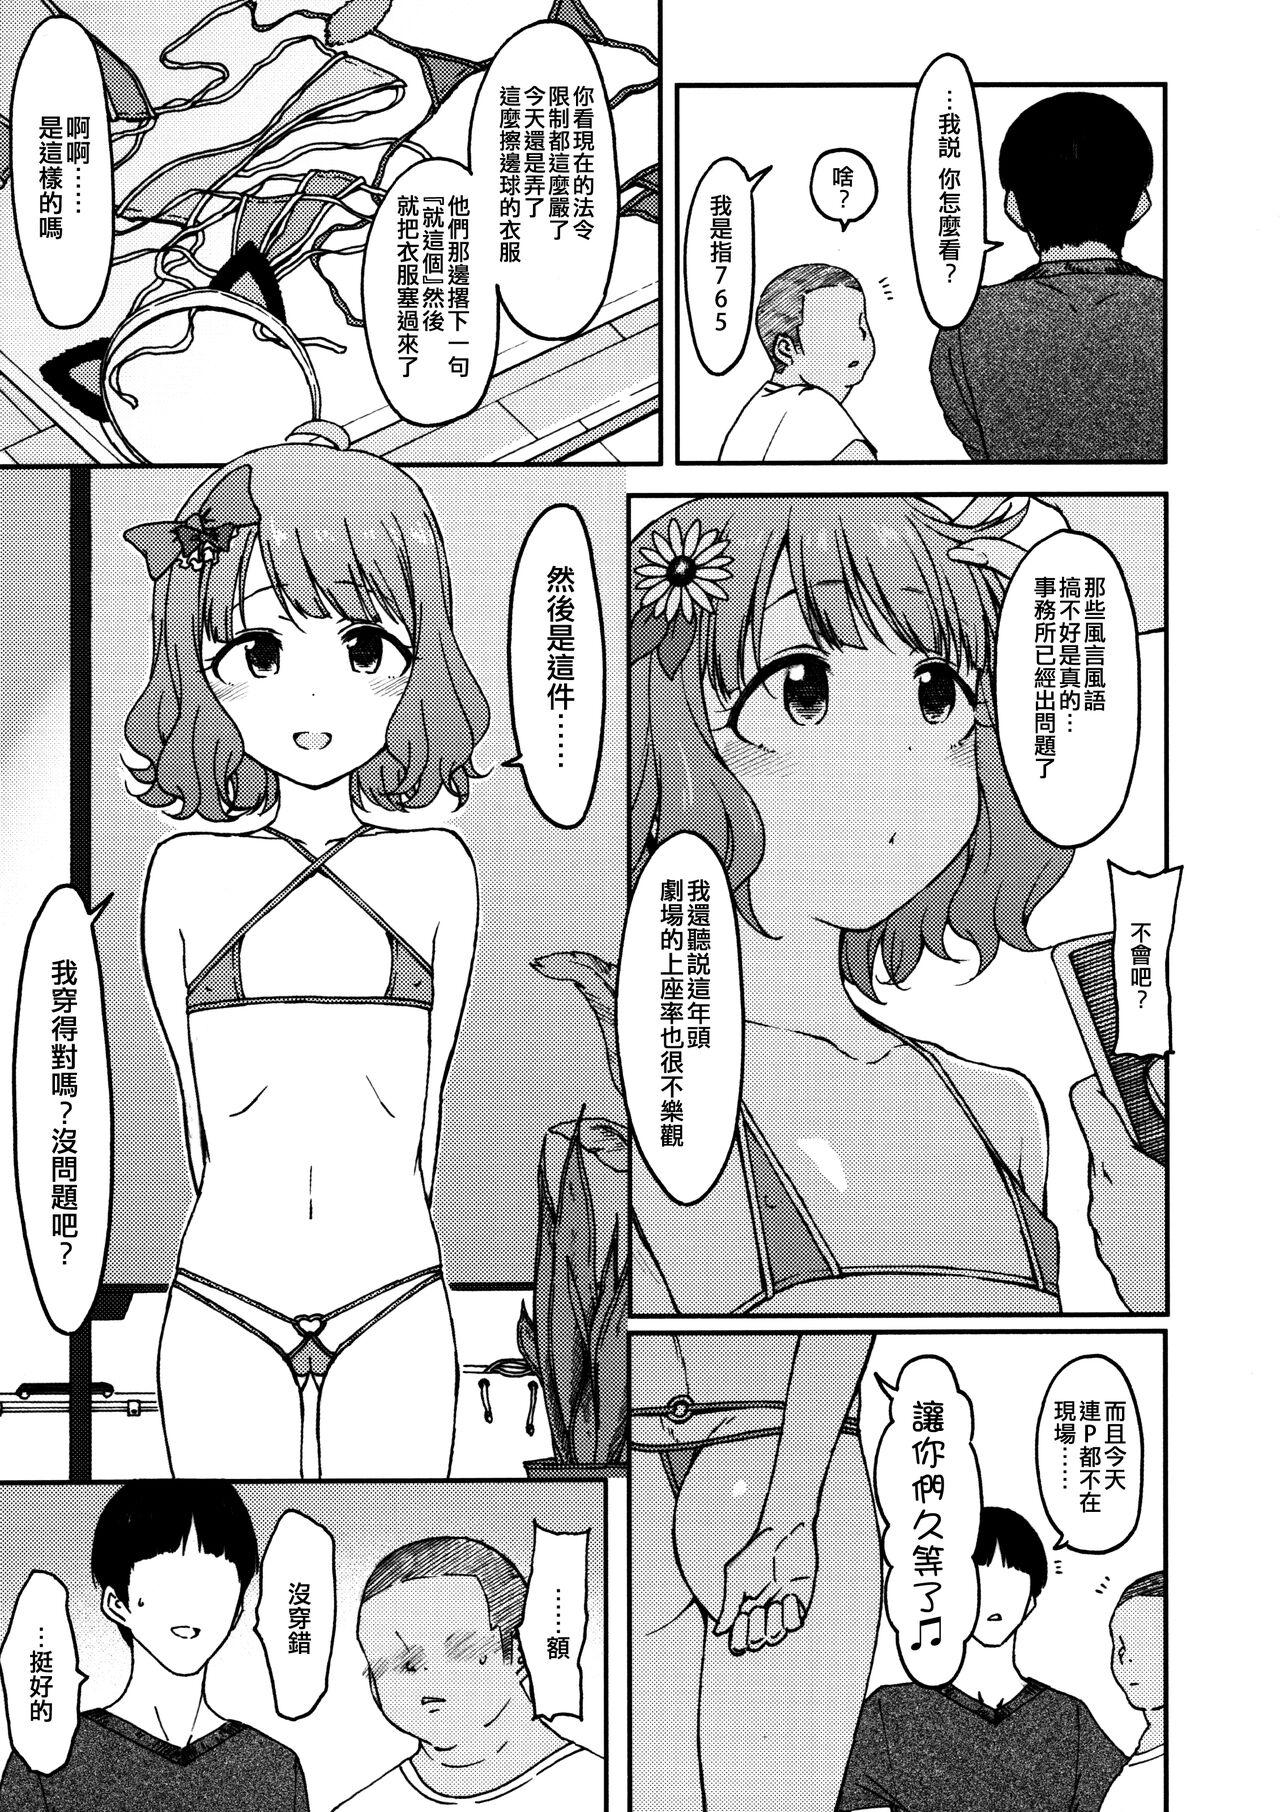 Horny Candy Wrapper - The idolmaster Fuck - Page 6